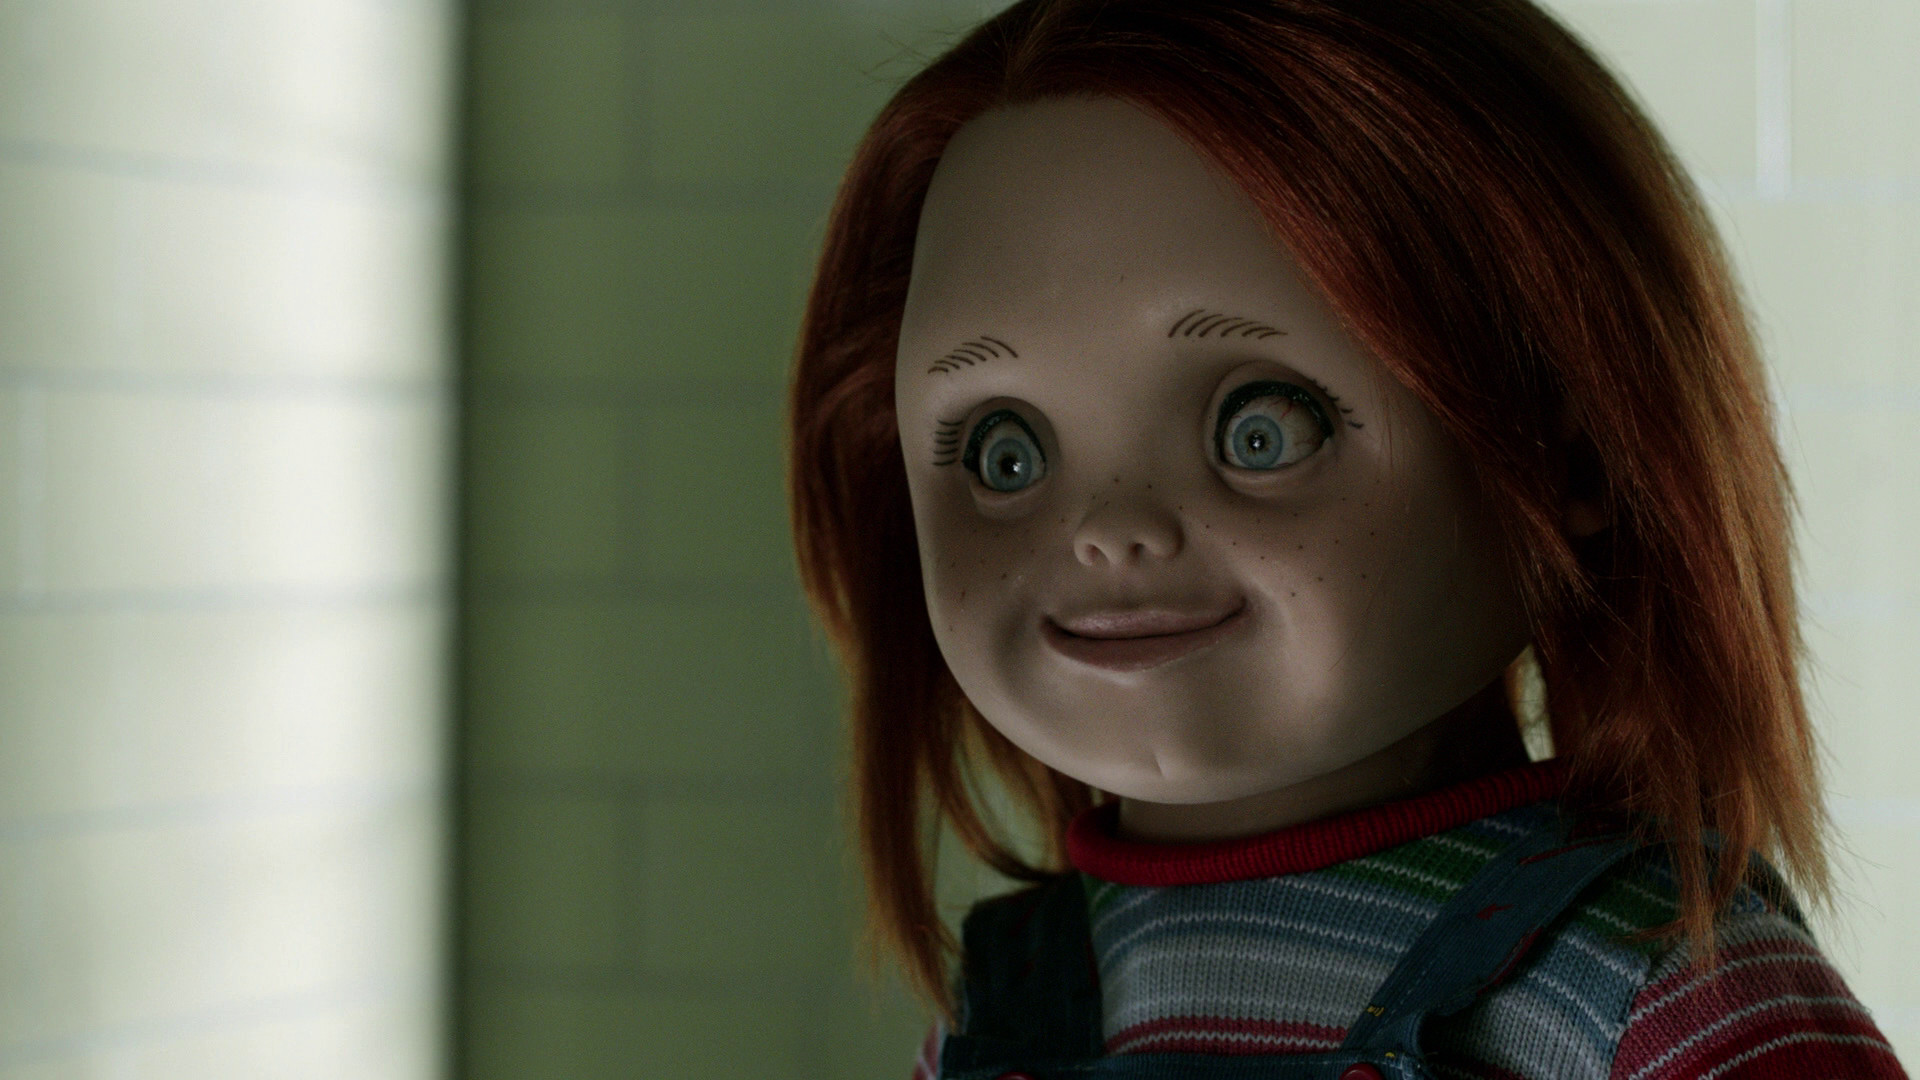 Get free high quality HD wallpapers chucky doll wallpaper hd